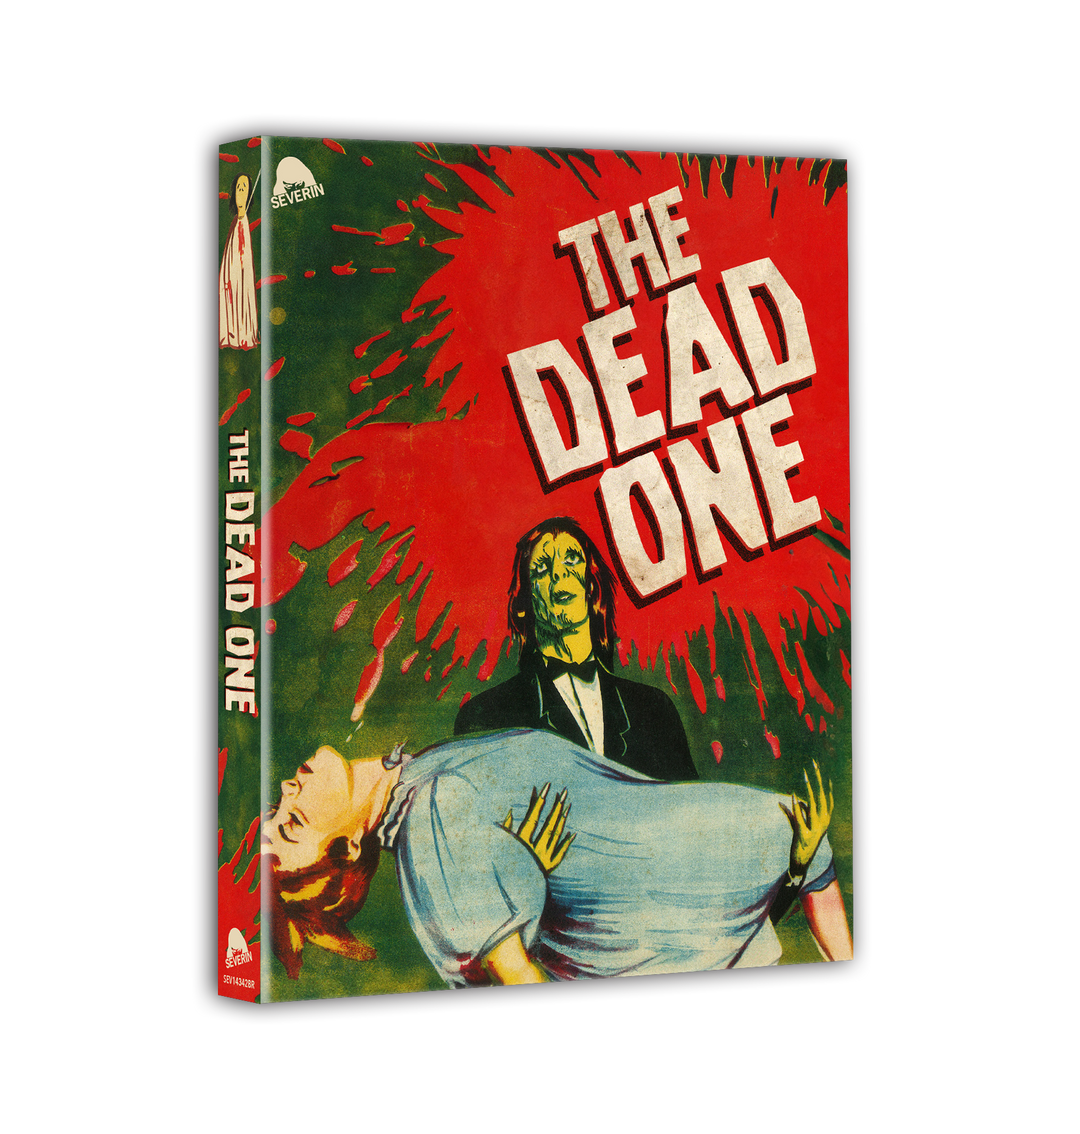 The Dead One [Blu-ray w/Exclusive Slipcover] – Severin Films